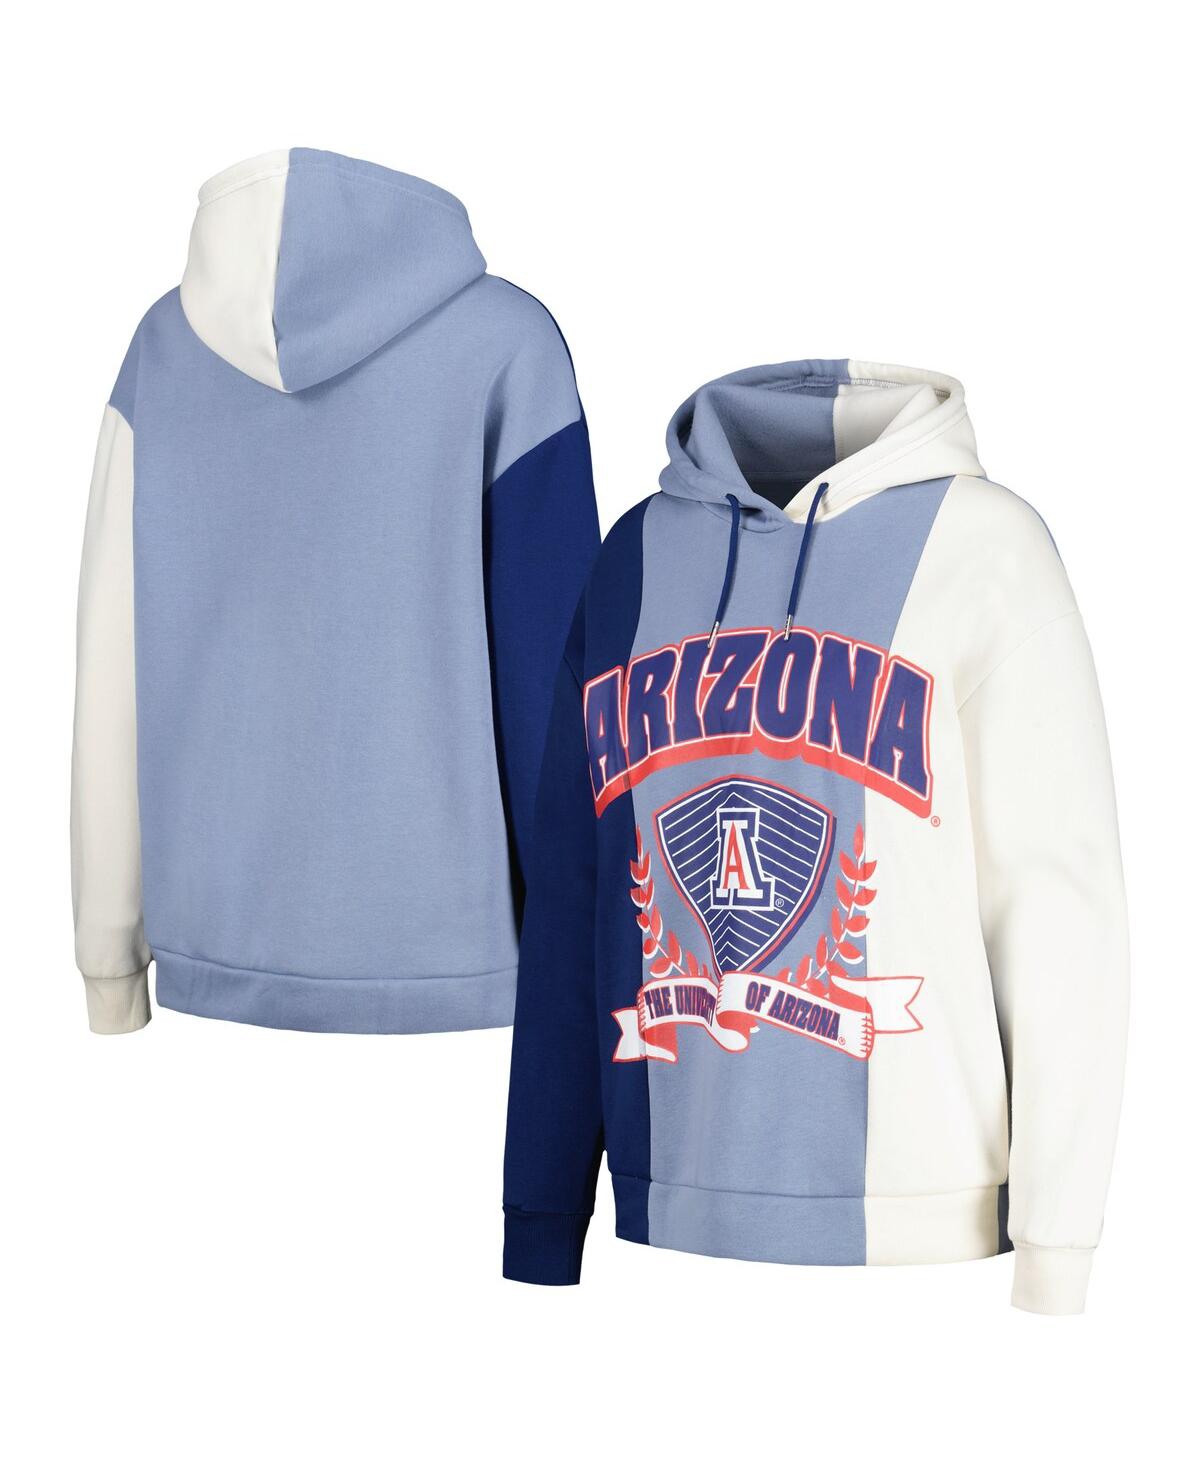 Women's Gameday Couture Navy Arizona Wildcats Hall of Fame Colorblock Pullover Hoodie - Navy